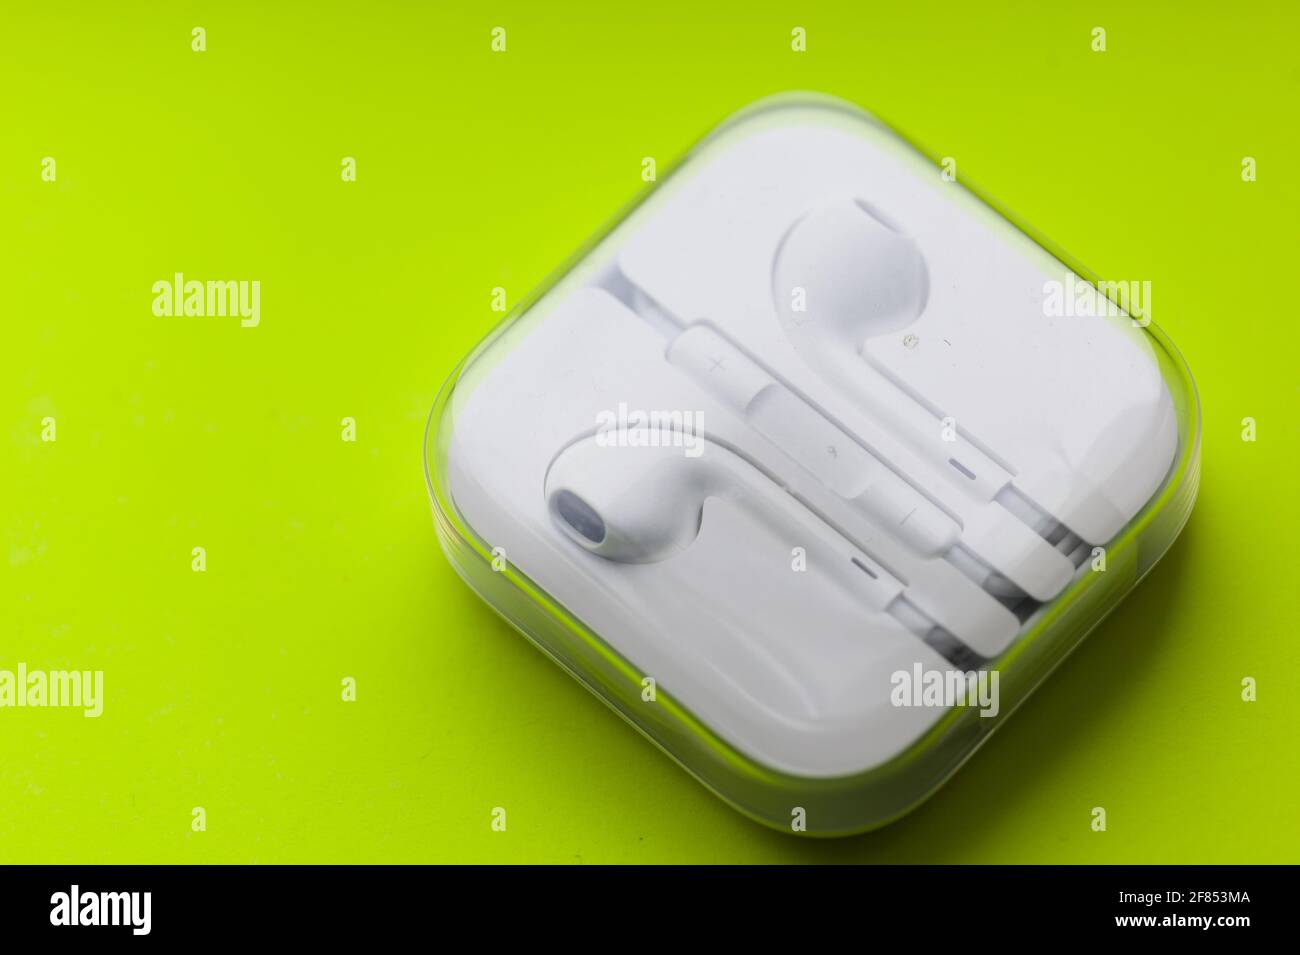 Wearable Tech / Lifestyle - Close-up of a pair of boxed earpod headphones on a neon yellow background Stock Photo